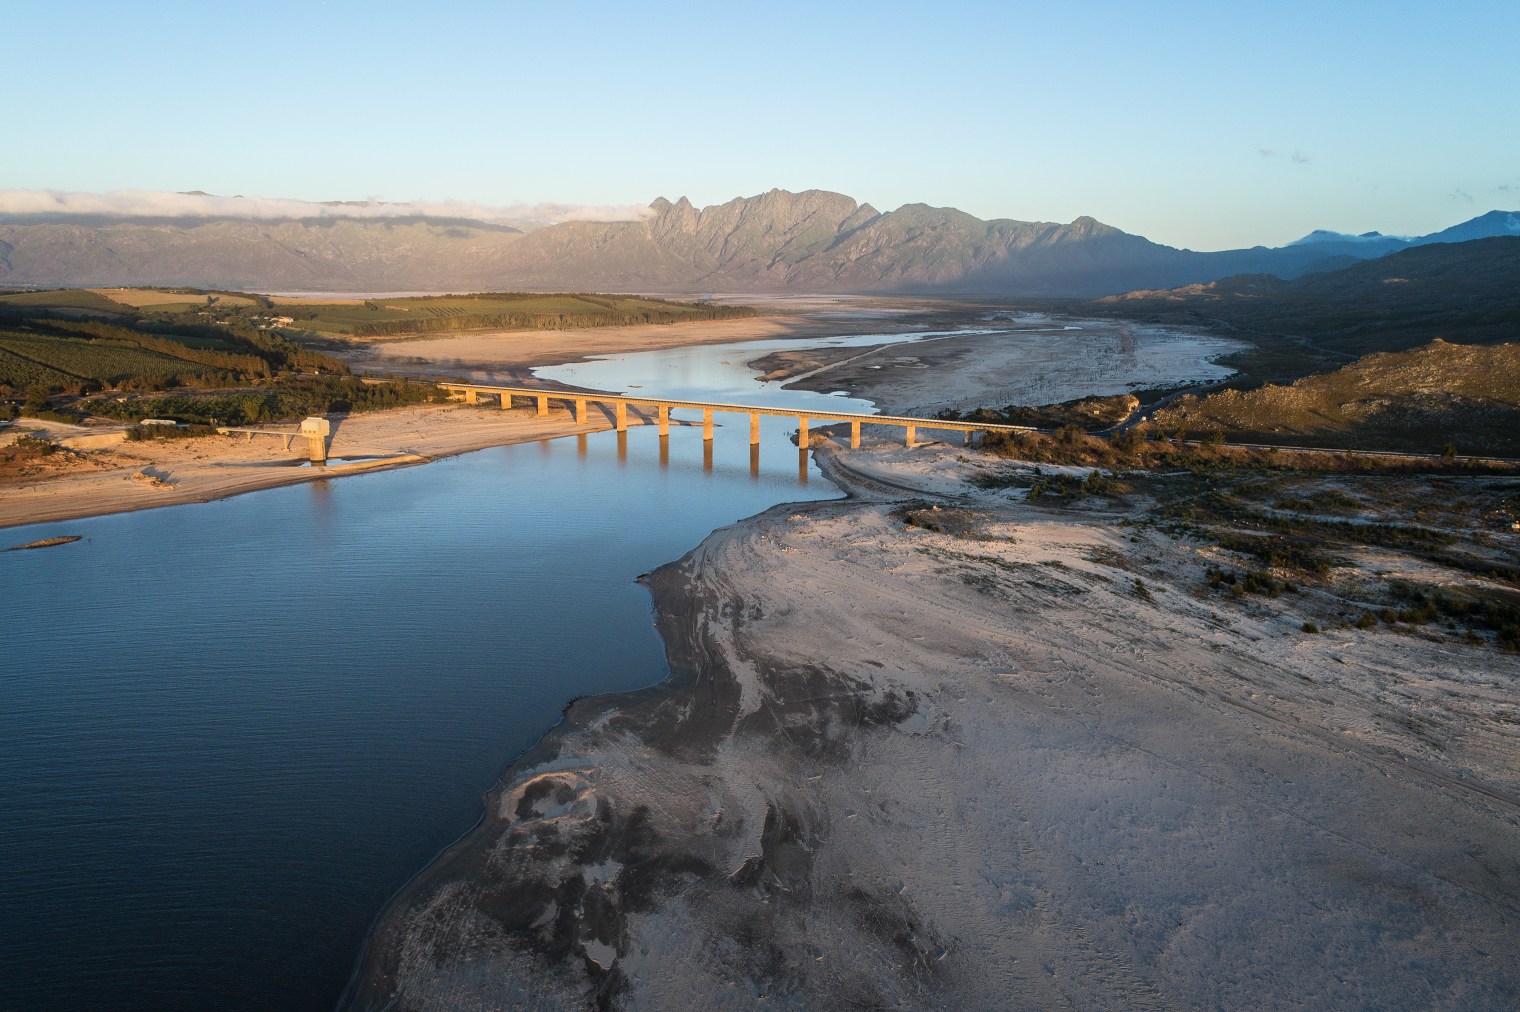 Cape Town: What It's Like to Live Through Water Crisis